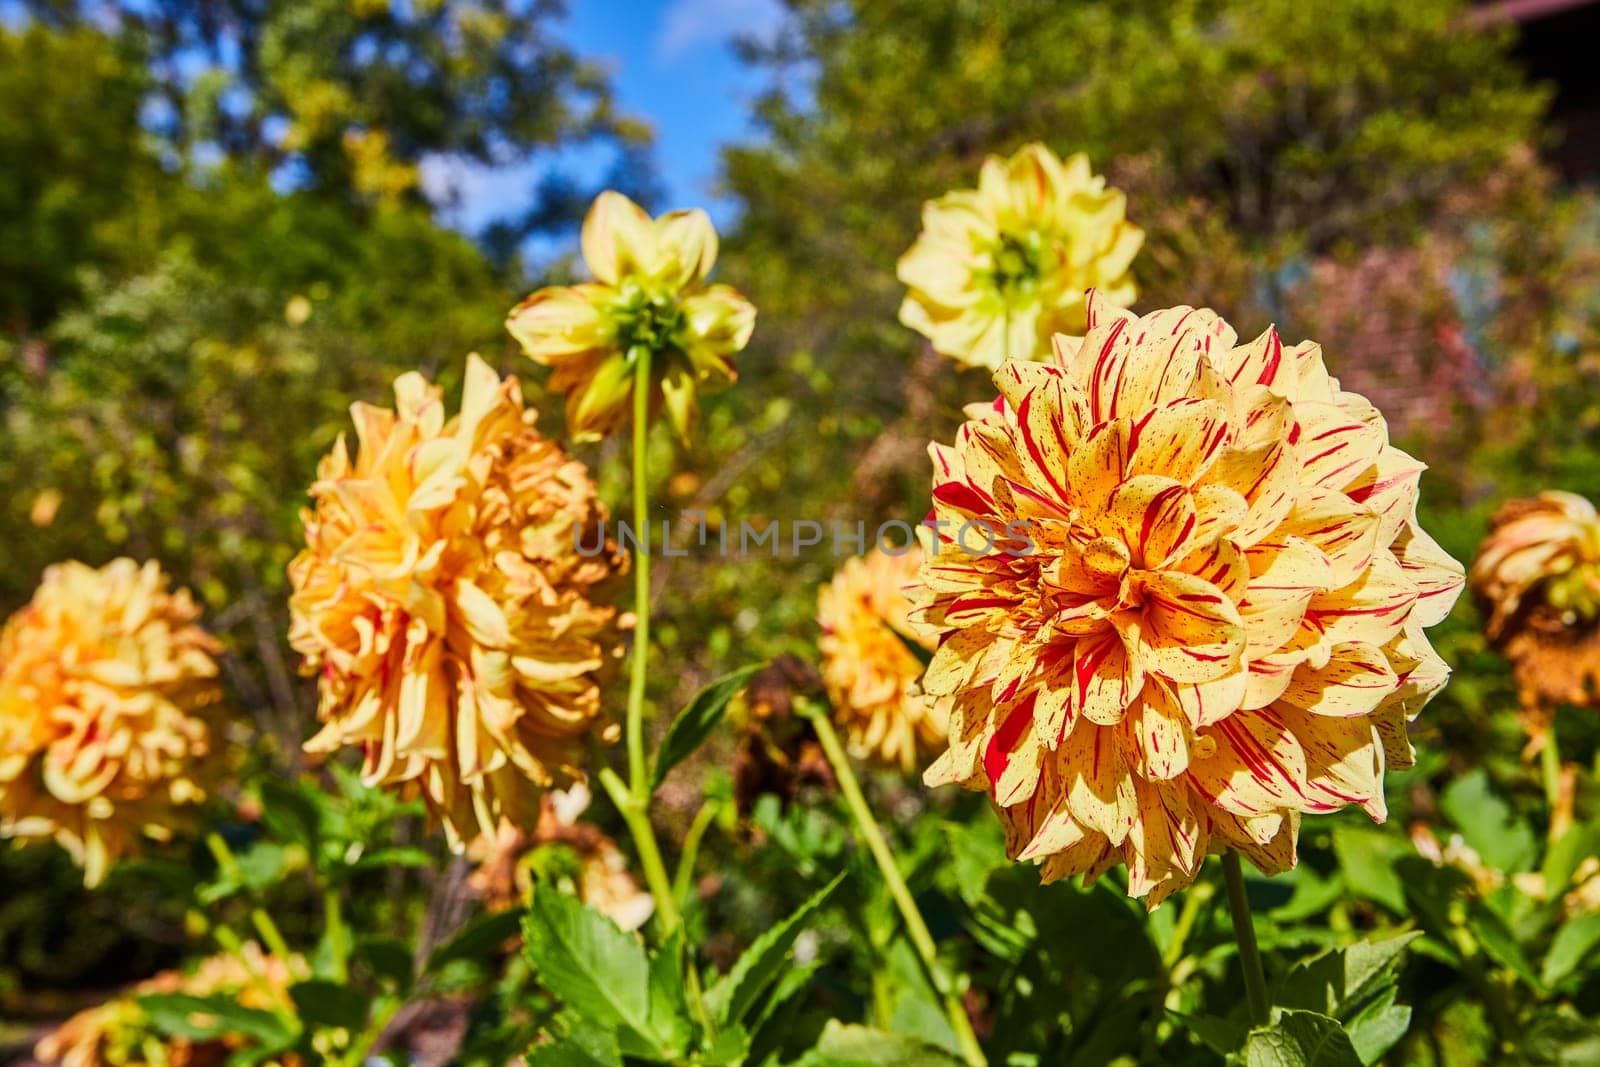 Vibrant Dahlias in Bloom with Lush Greenery, Eye-Level View by njproductions